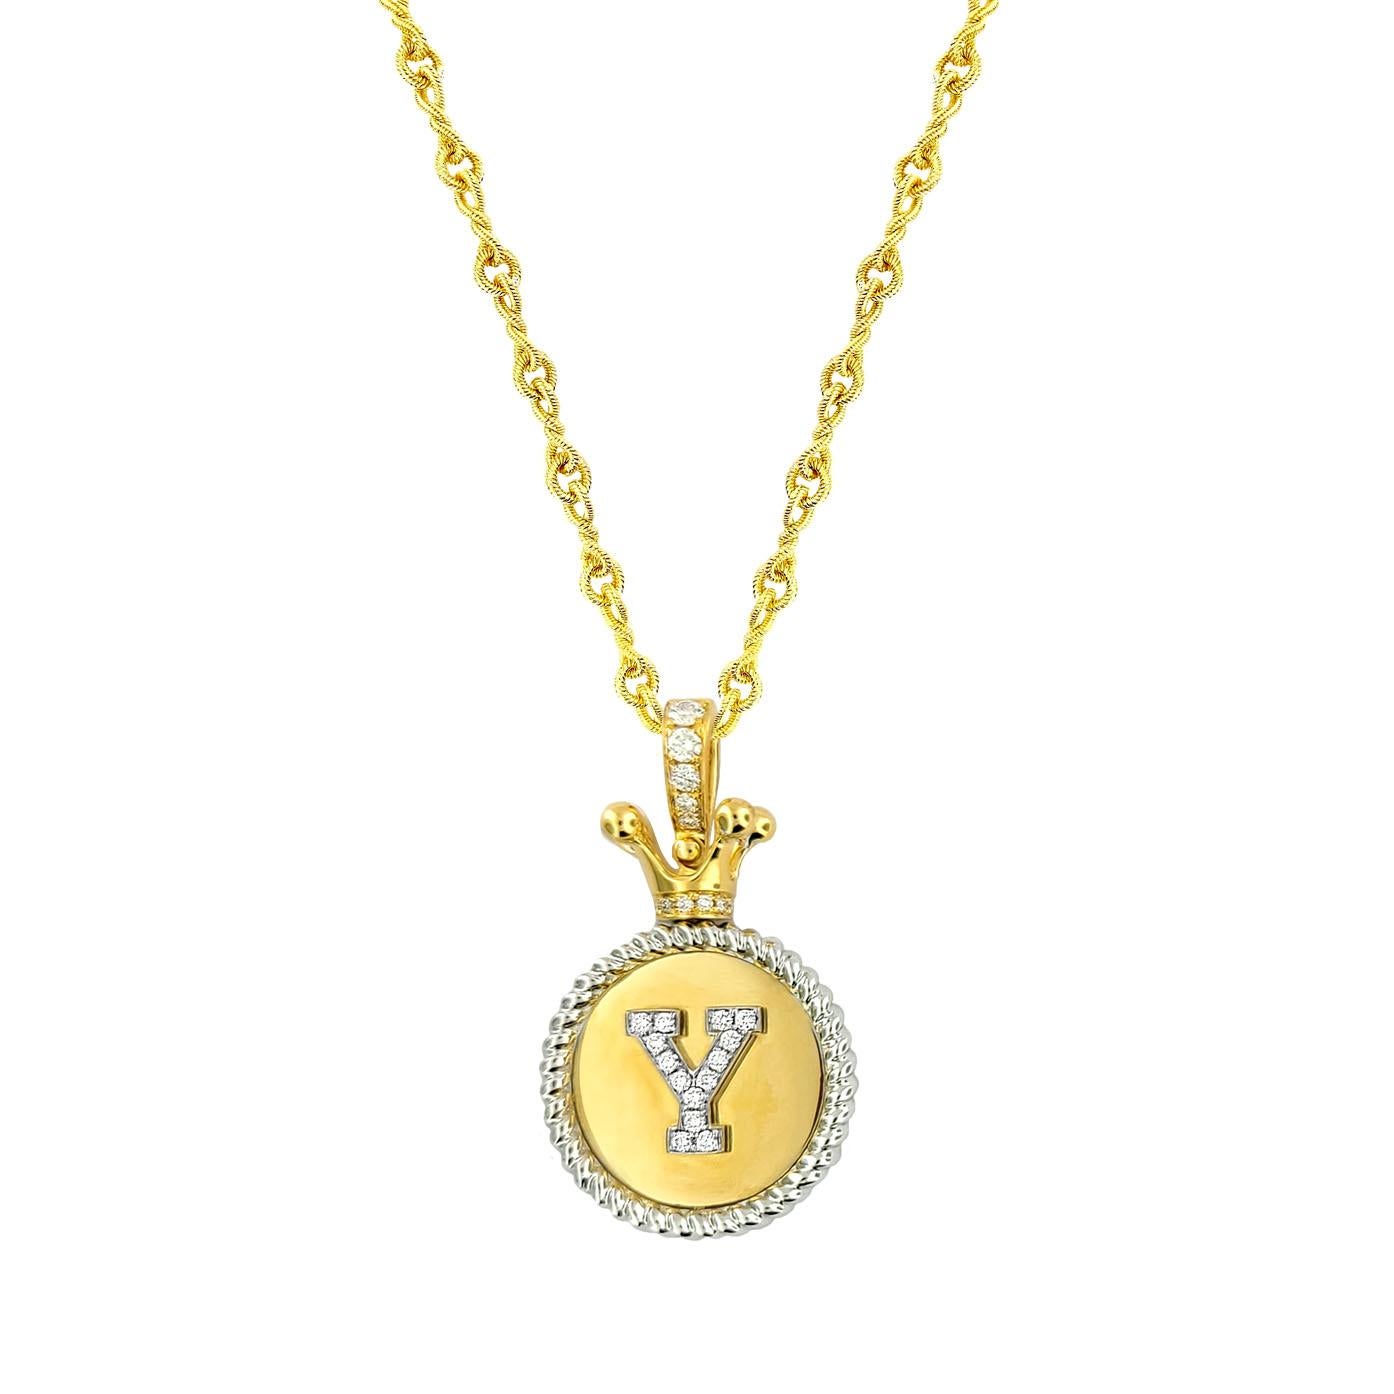 Produced by award winning Italian designer Stefano Vitolo. Stefano creates custom artisanal one of a kind jewelry with excellent gemstones in a truly old world Italian craftmanship.
This handcrafted pendant has 0.19 total carat weight of F/G color,